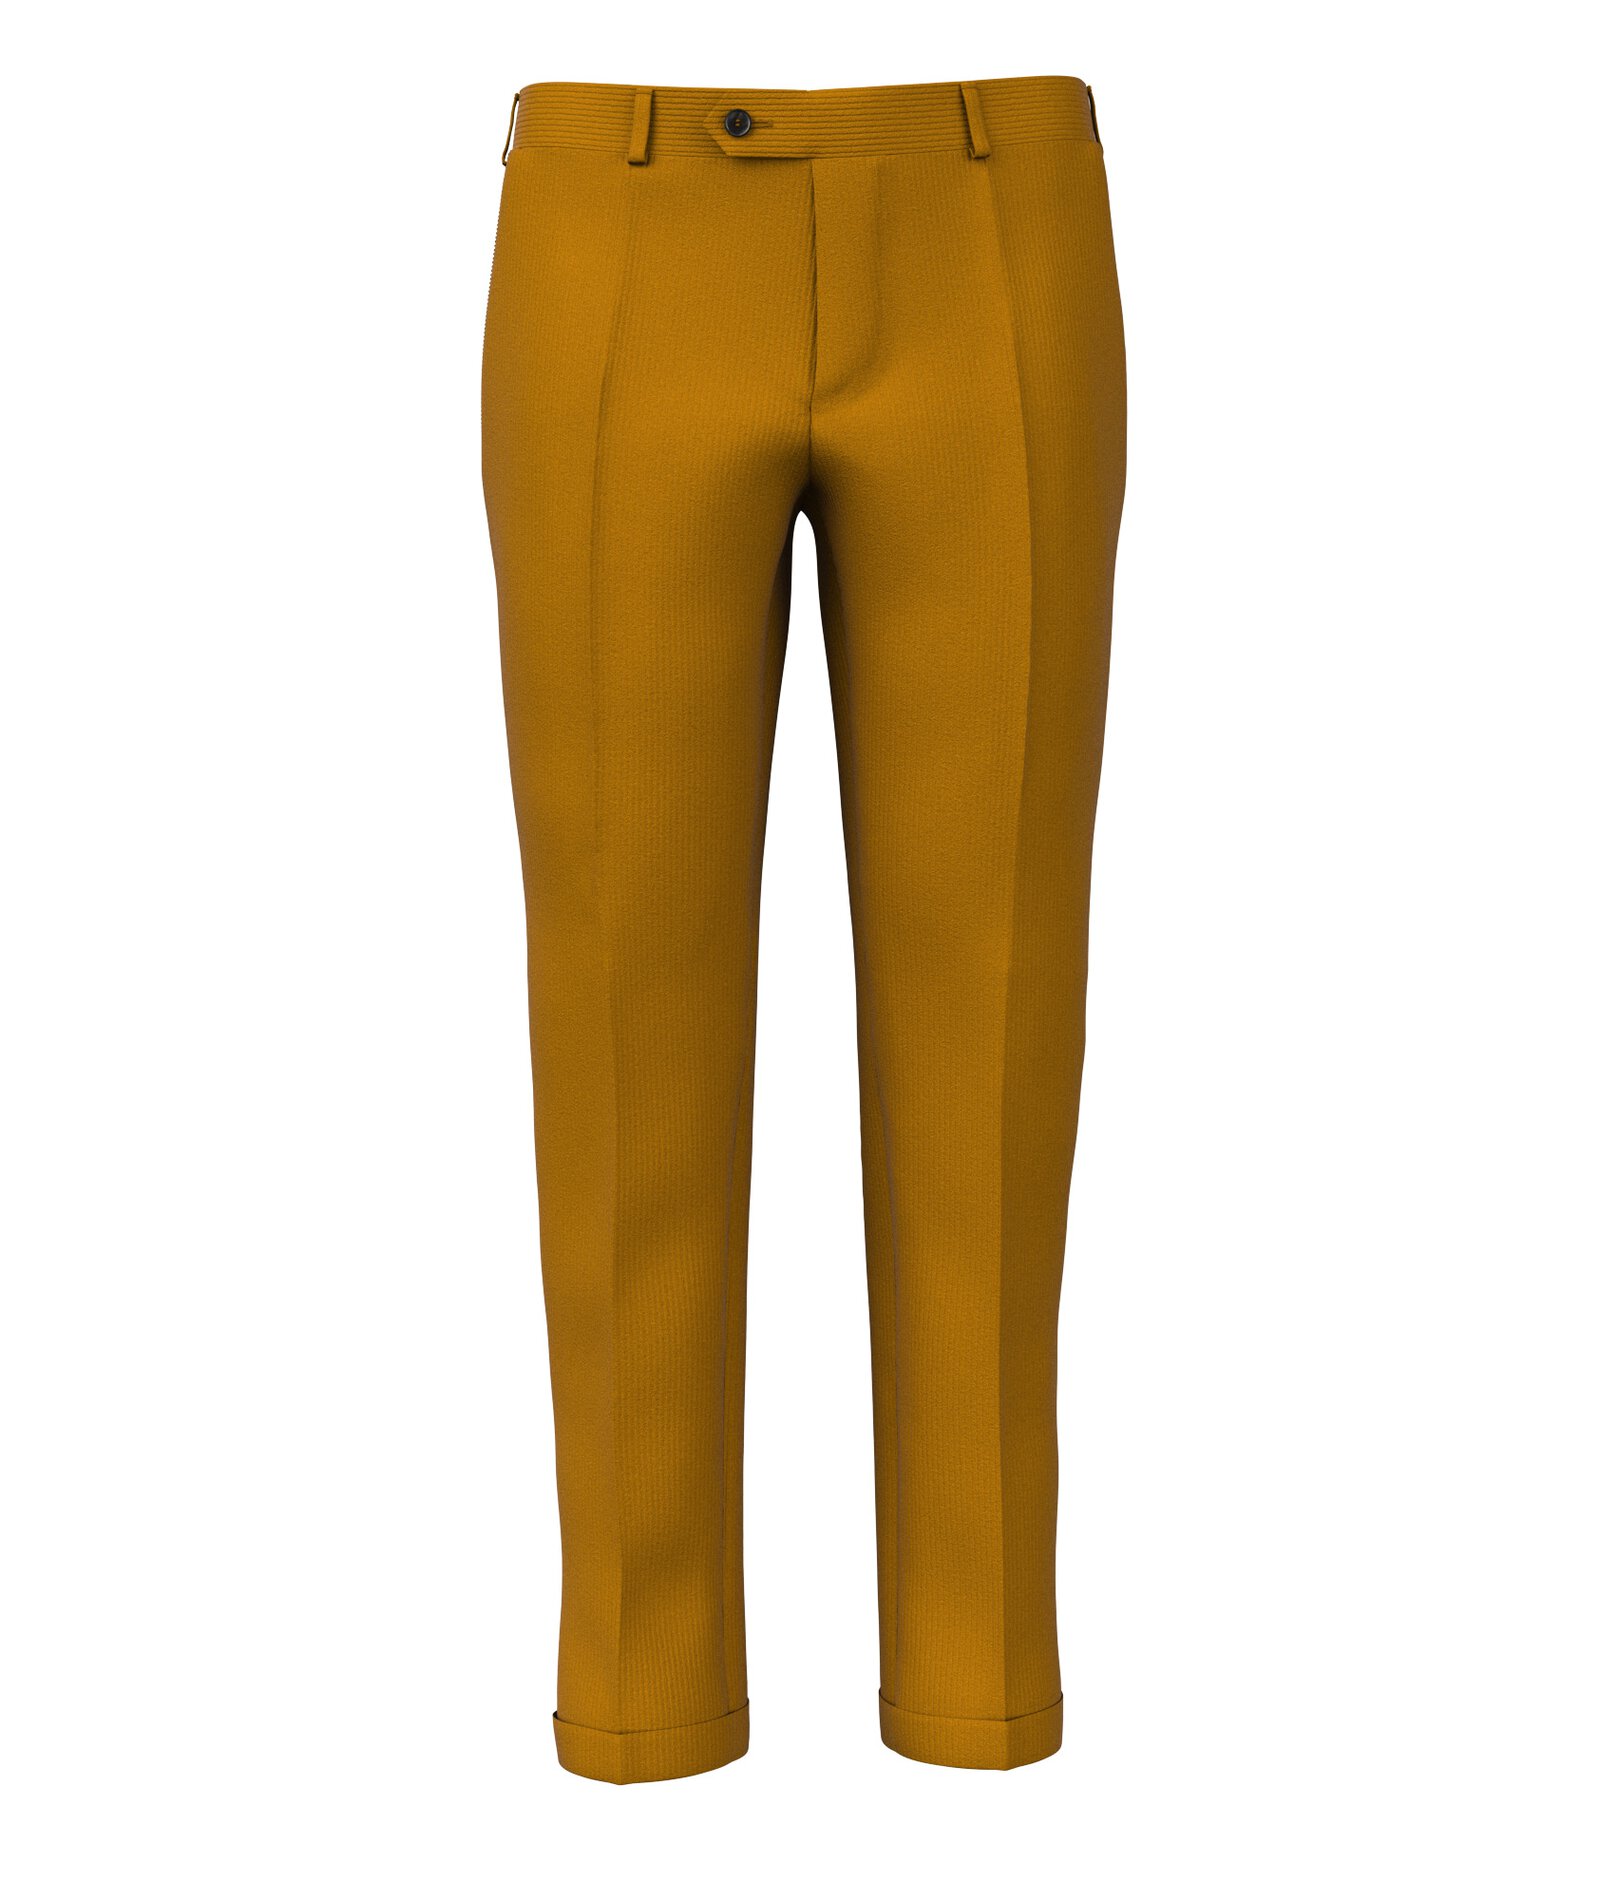 Ochre Yellow Ribbed Corduroy Men's Custom Trousers, Made to Measure ...